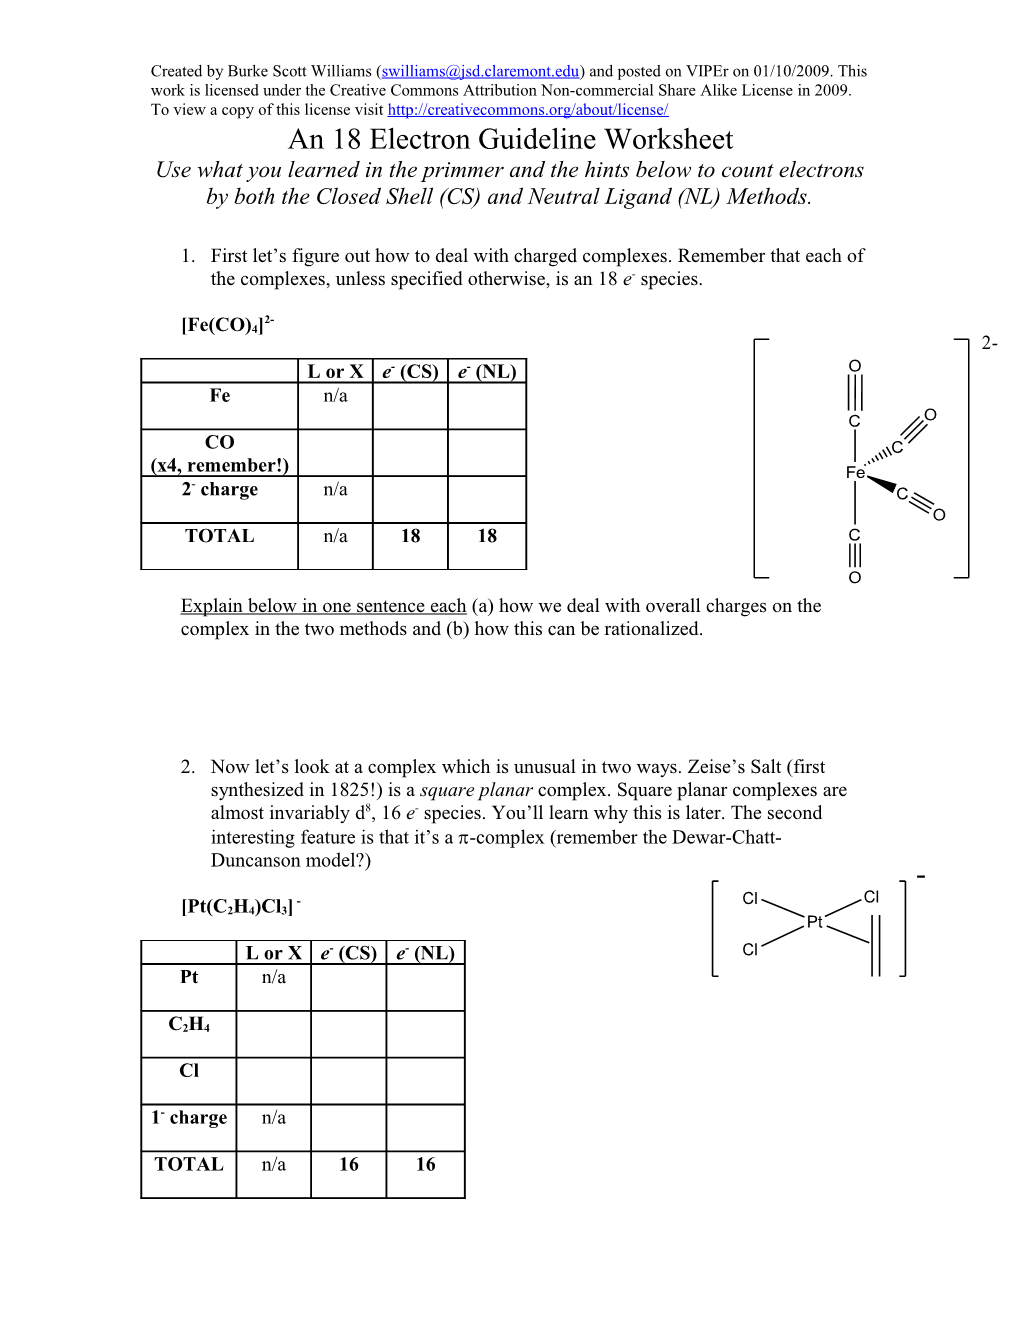 An 18 Electron Guideline Worksheet